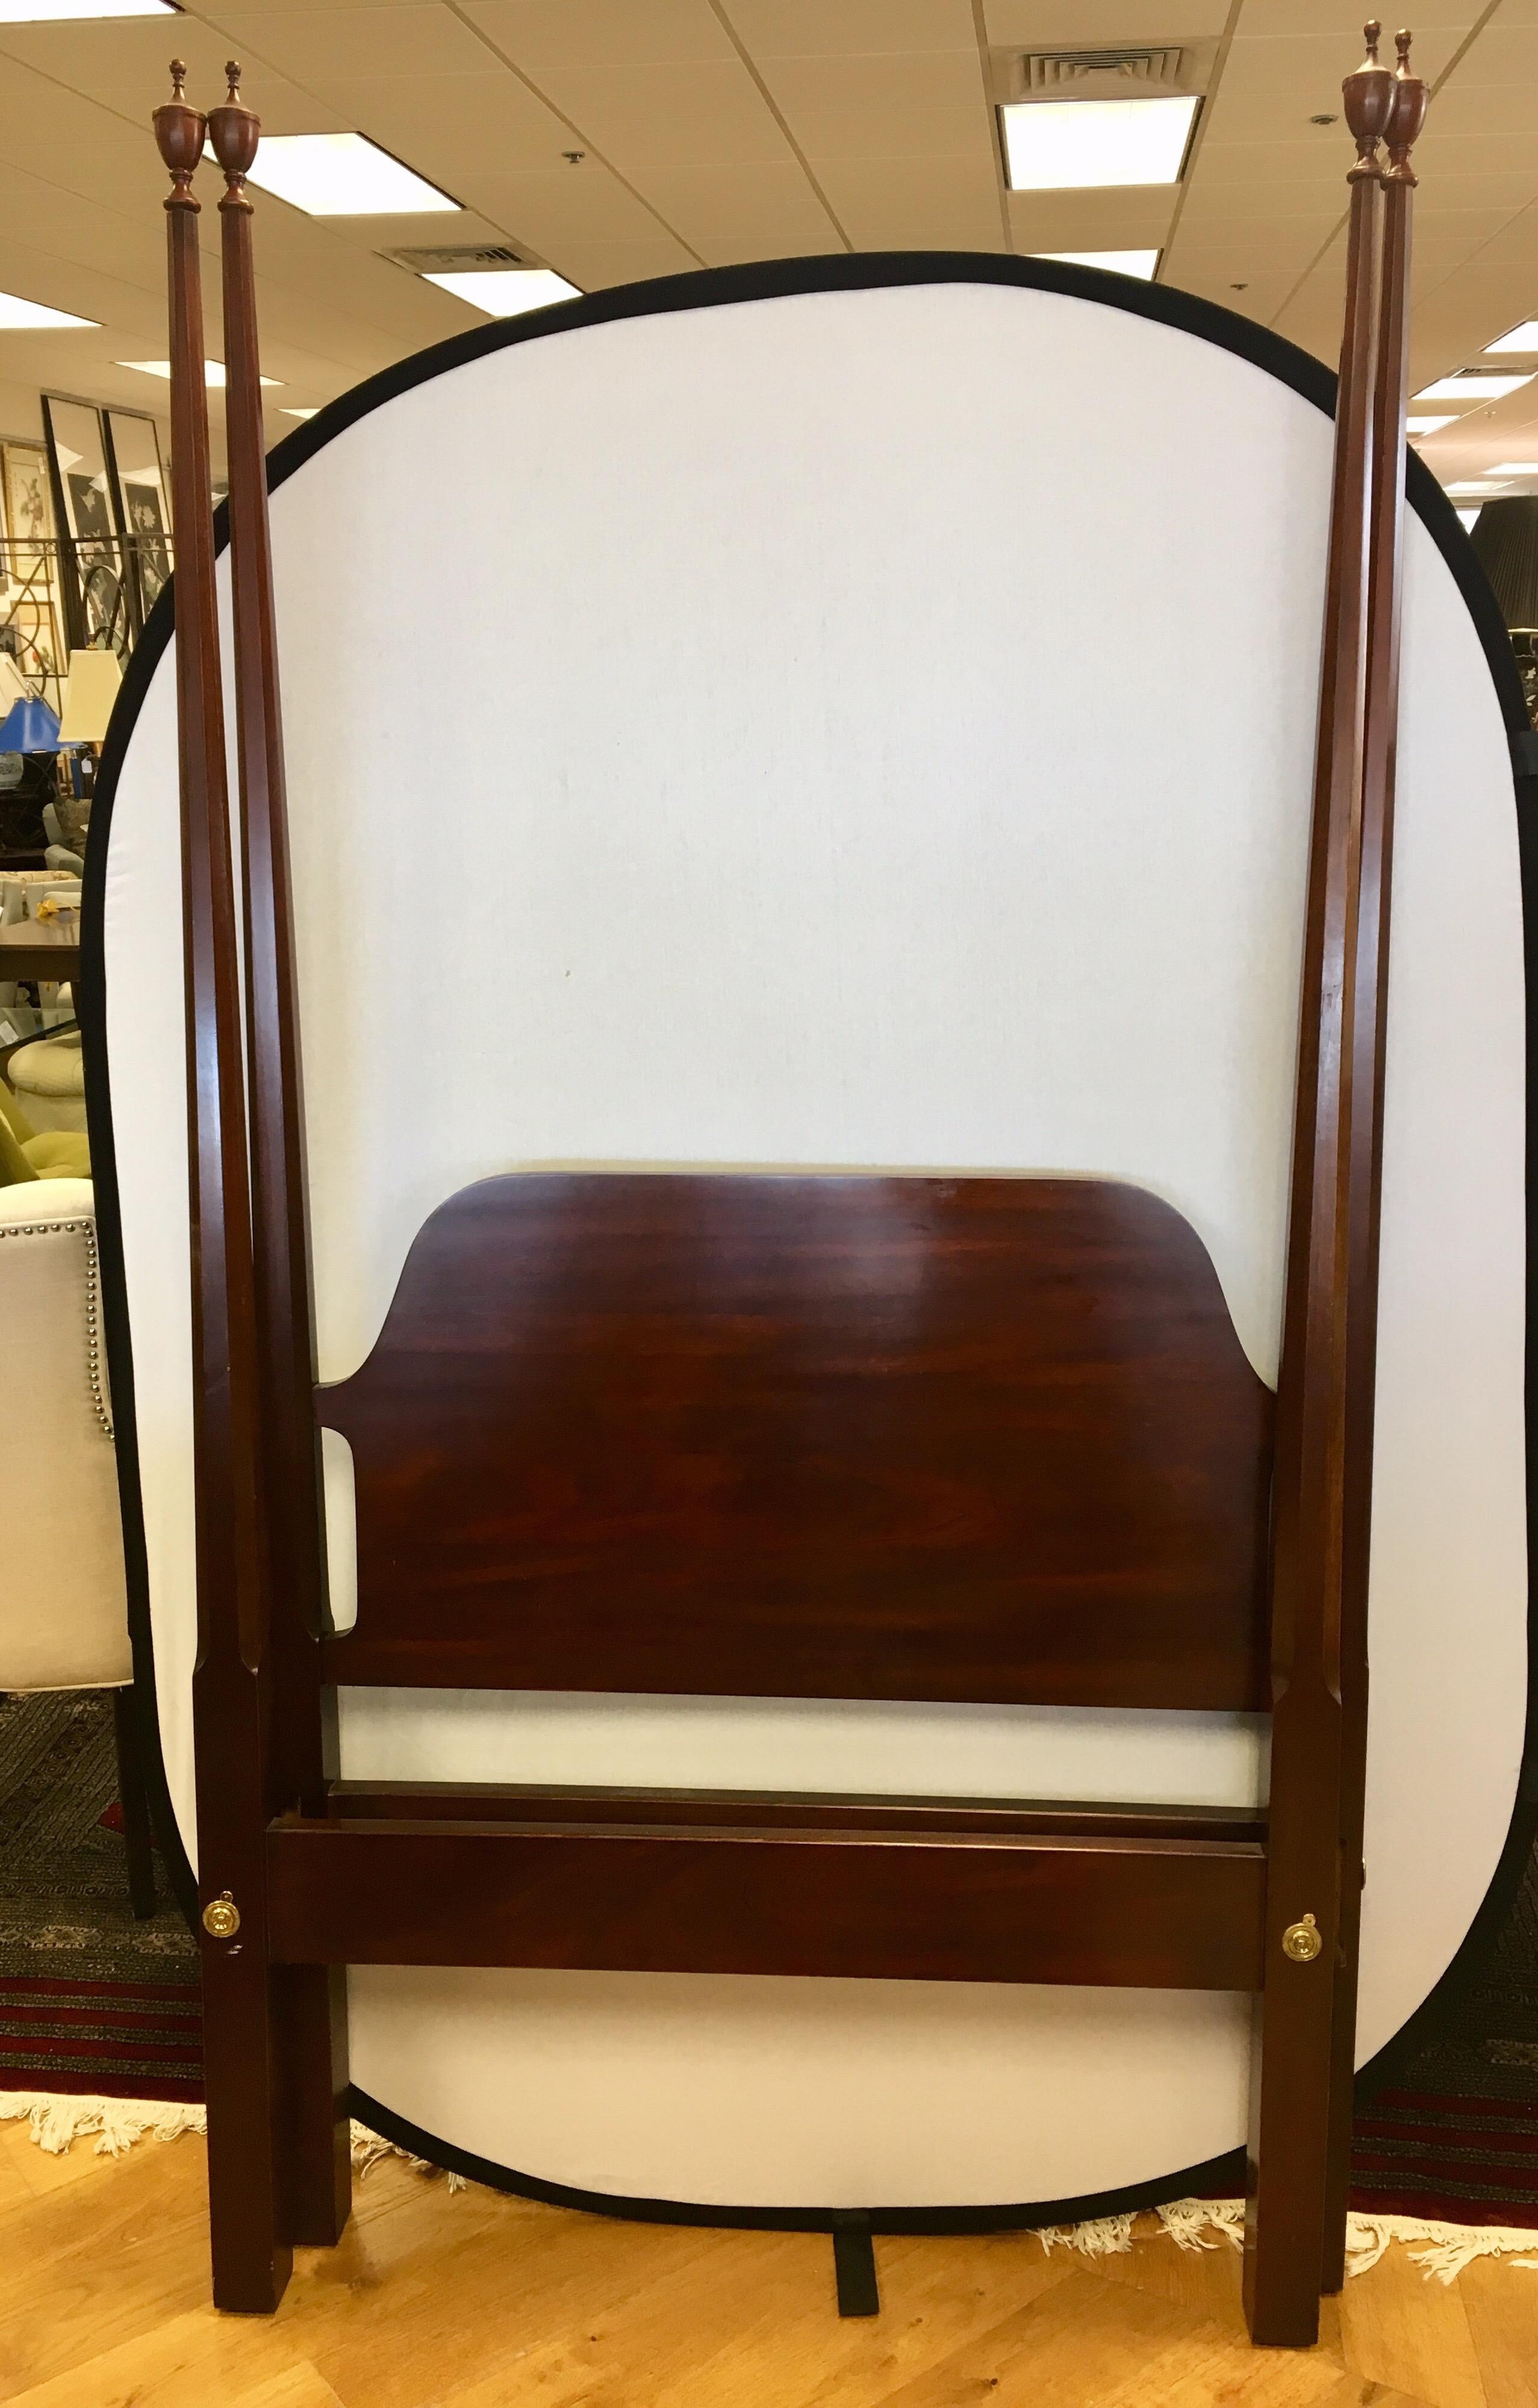 Complete set of two matching twin beds with headboard, footboard, rails and all hardware. All mahogany and in great condition. Easy to assemble.